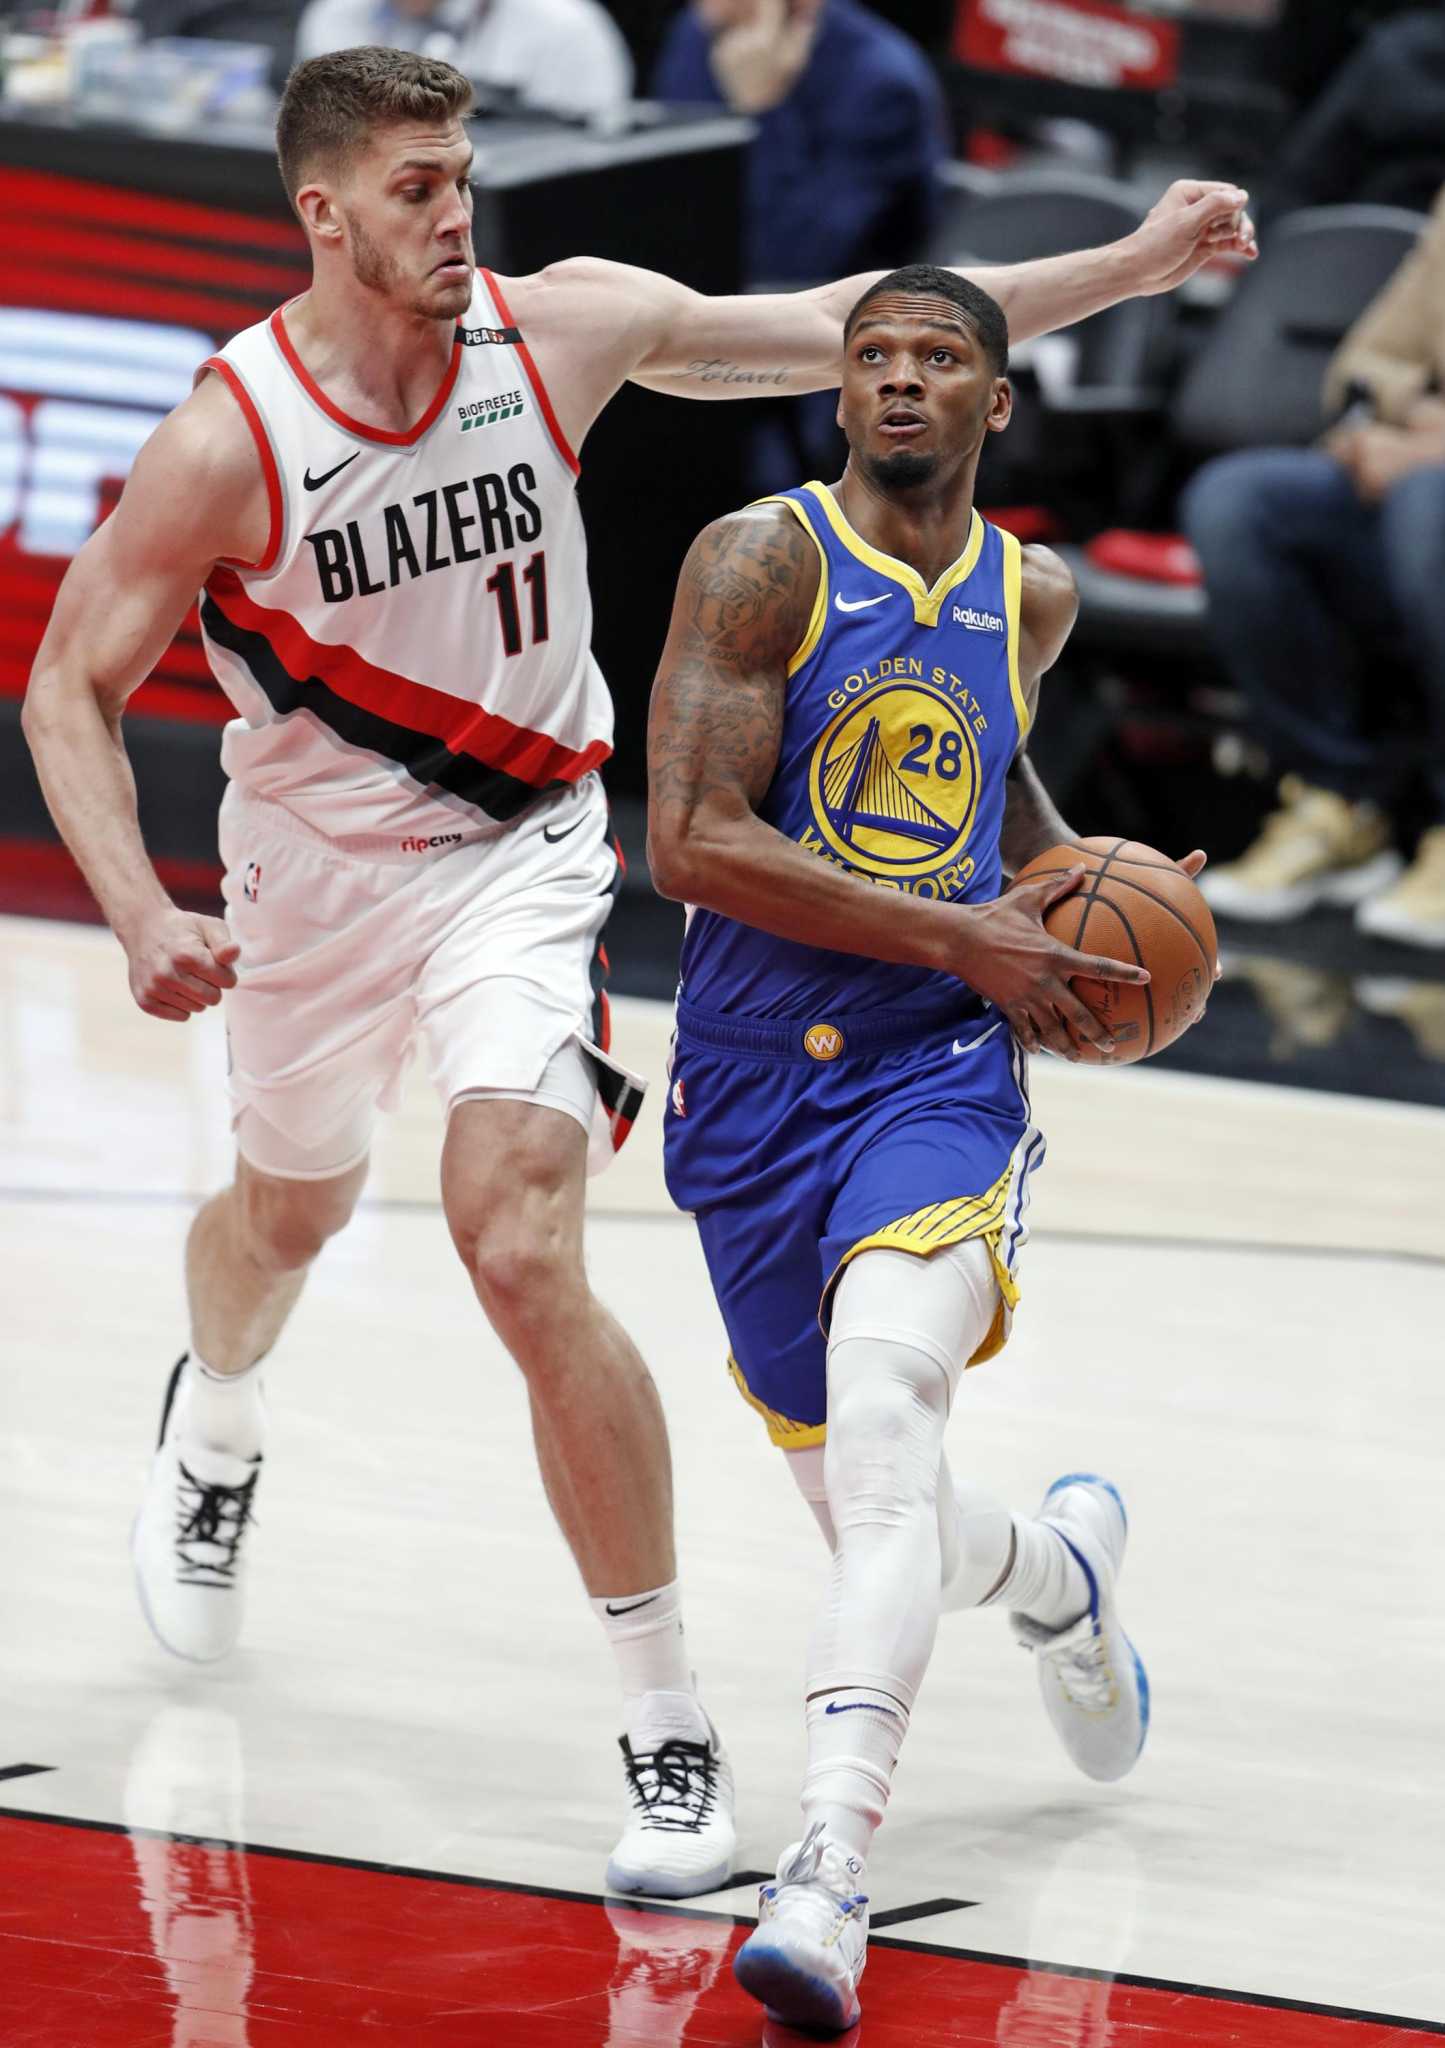 Warriors Alfonzo Mckinnie Scores 12 Points As Sub For Ailing Andre Iguodala